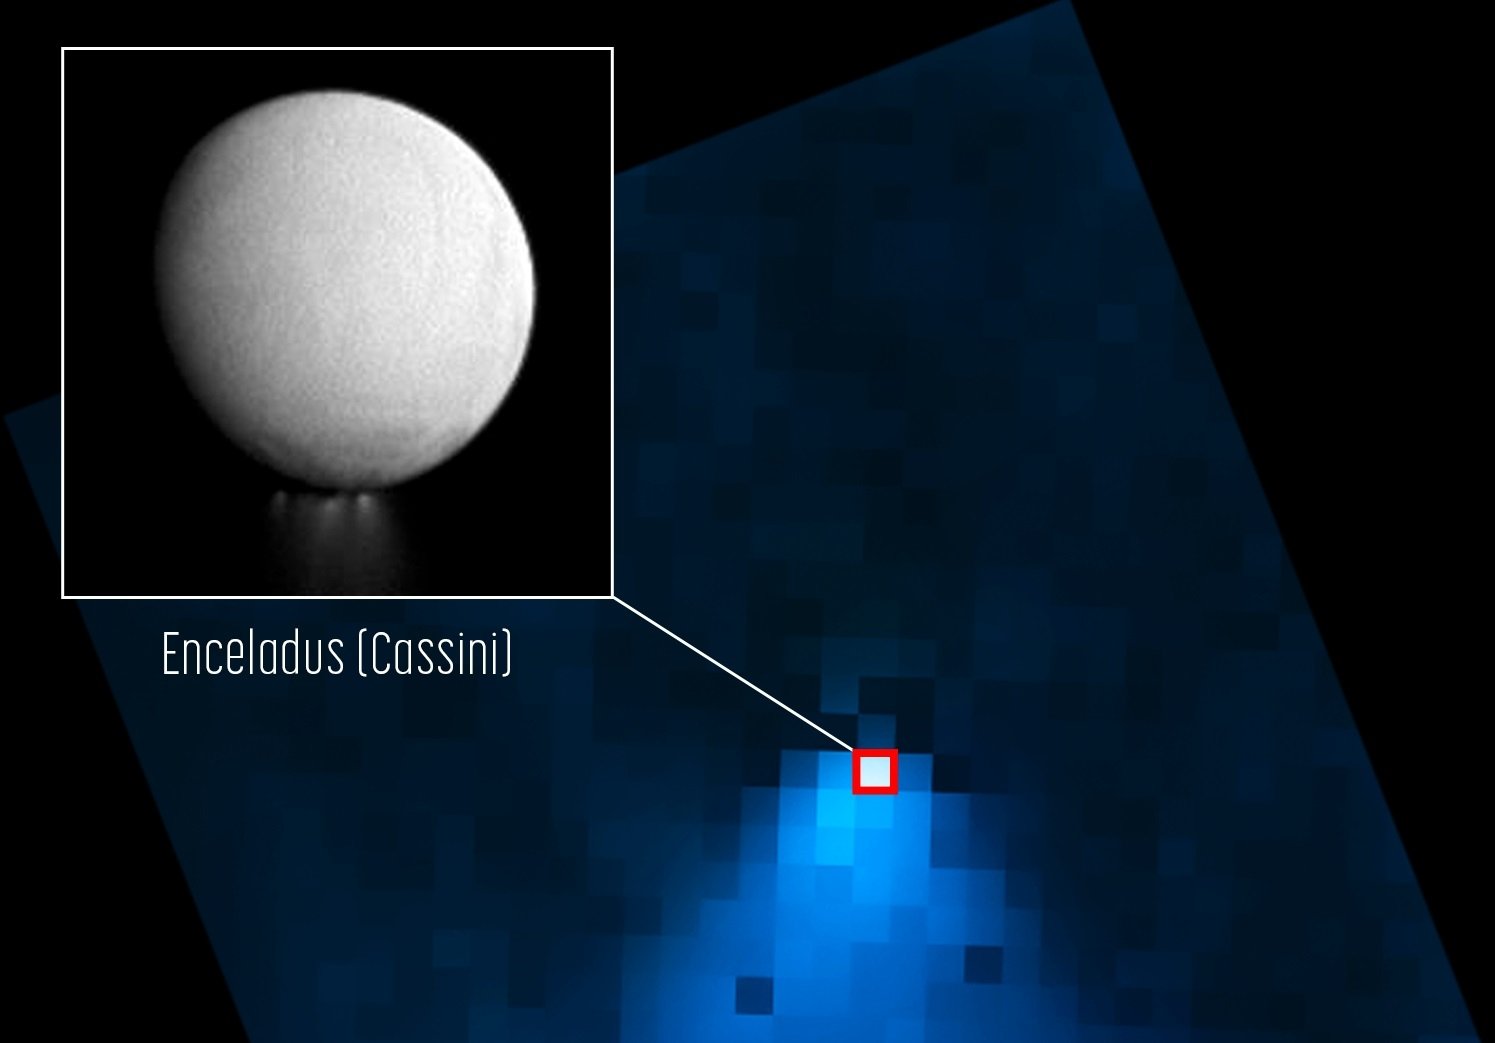 Webb telescope maps large plume jetting from Saturn's moon